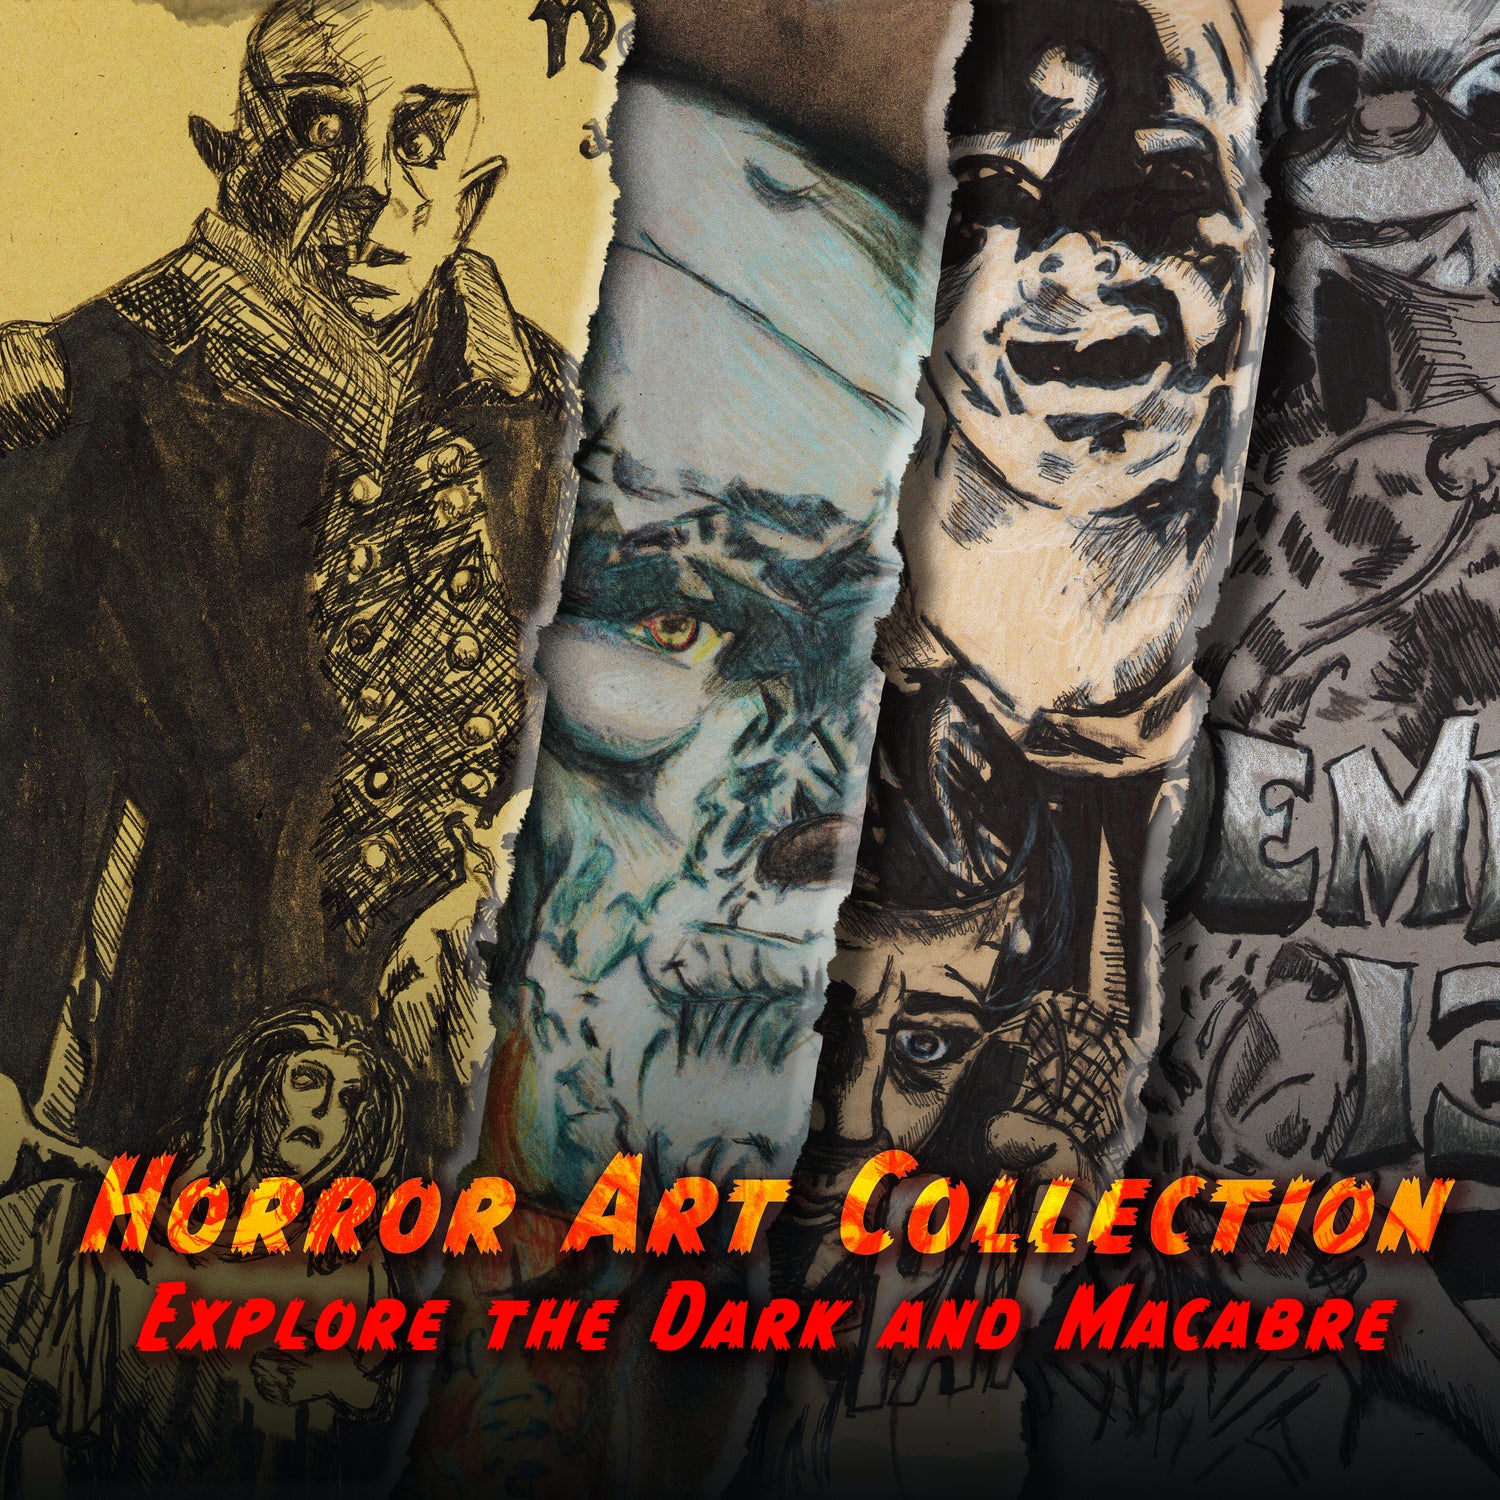 Horror Art Collection - Explore the Dark and Macabre